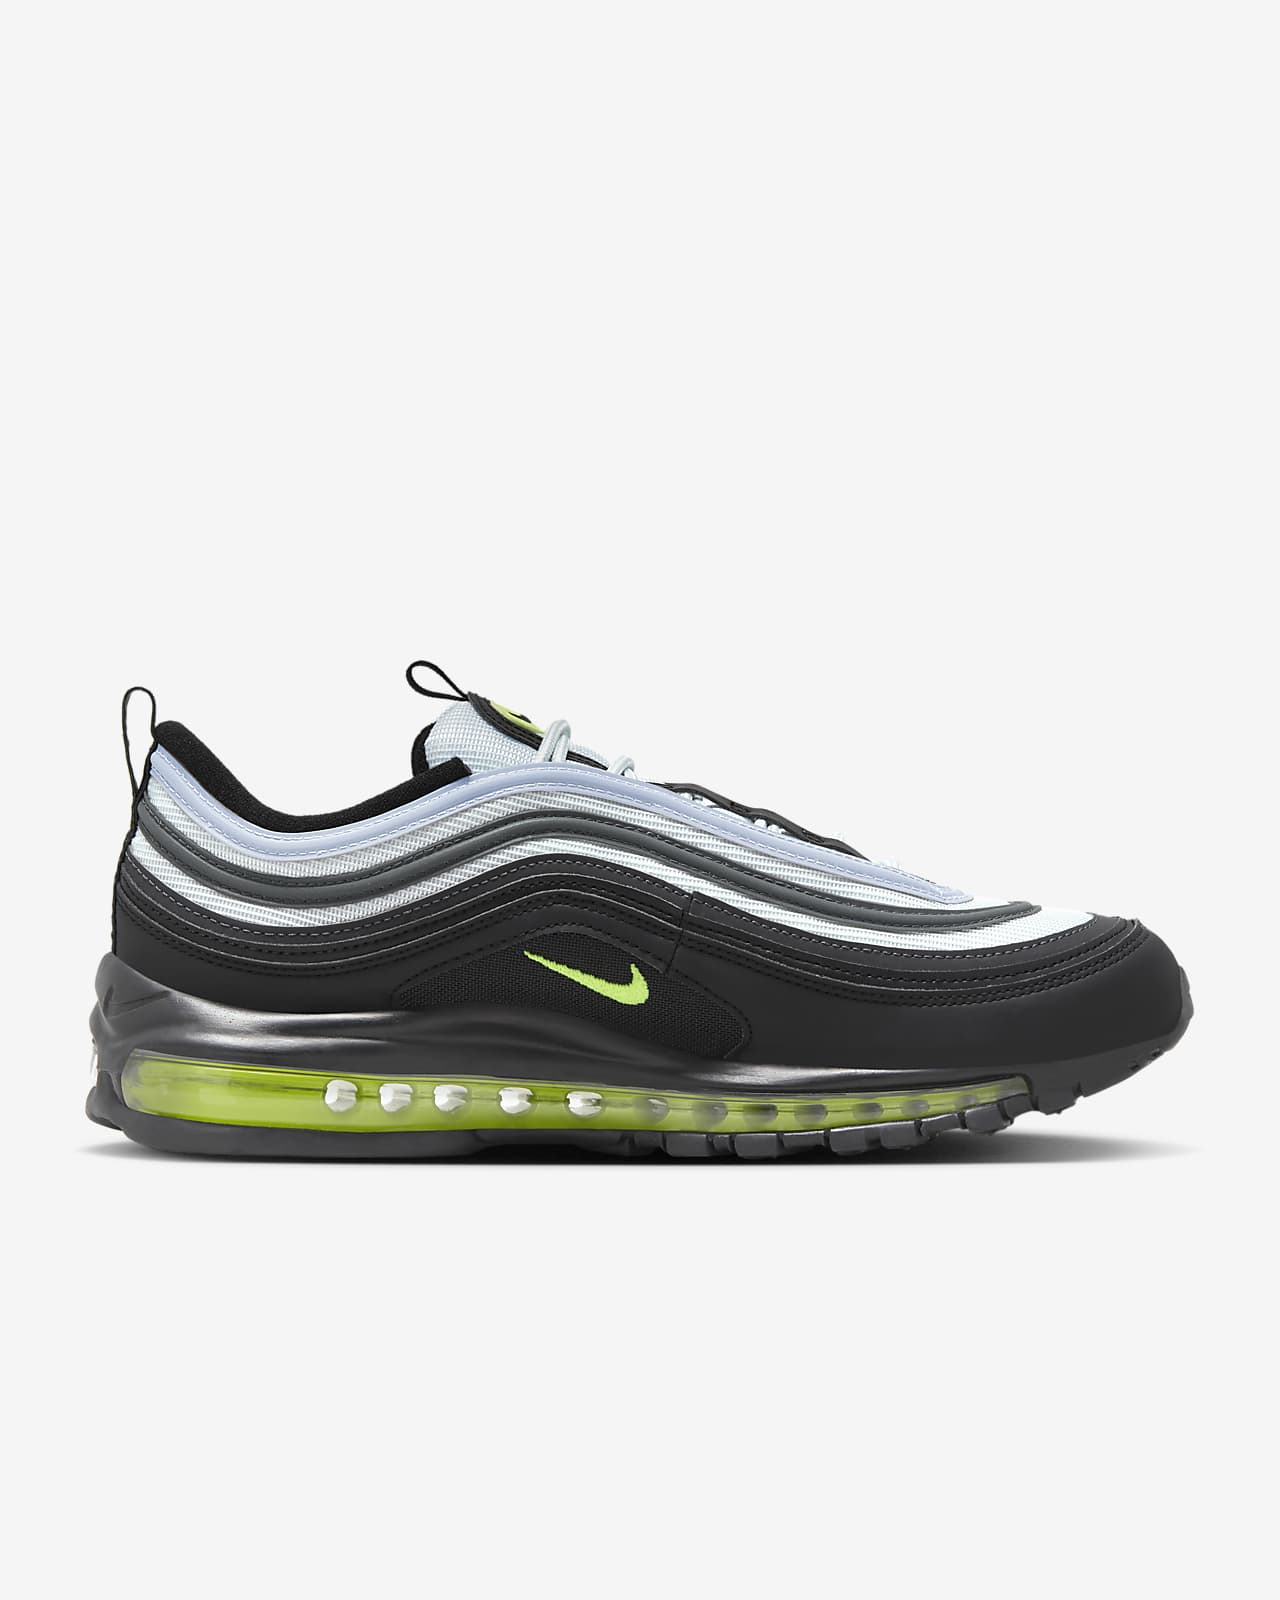 Nike Max Men's Shoes. ID